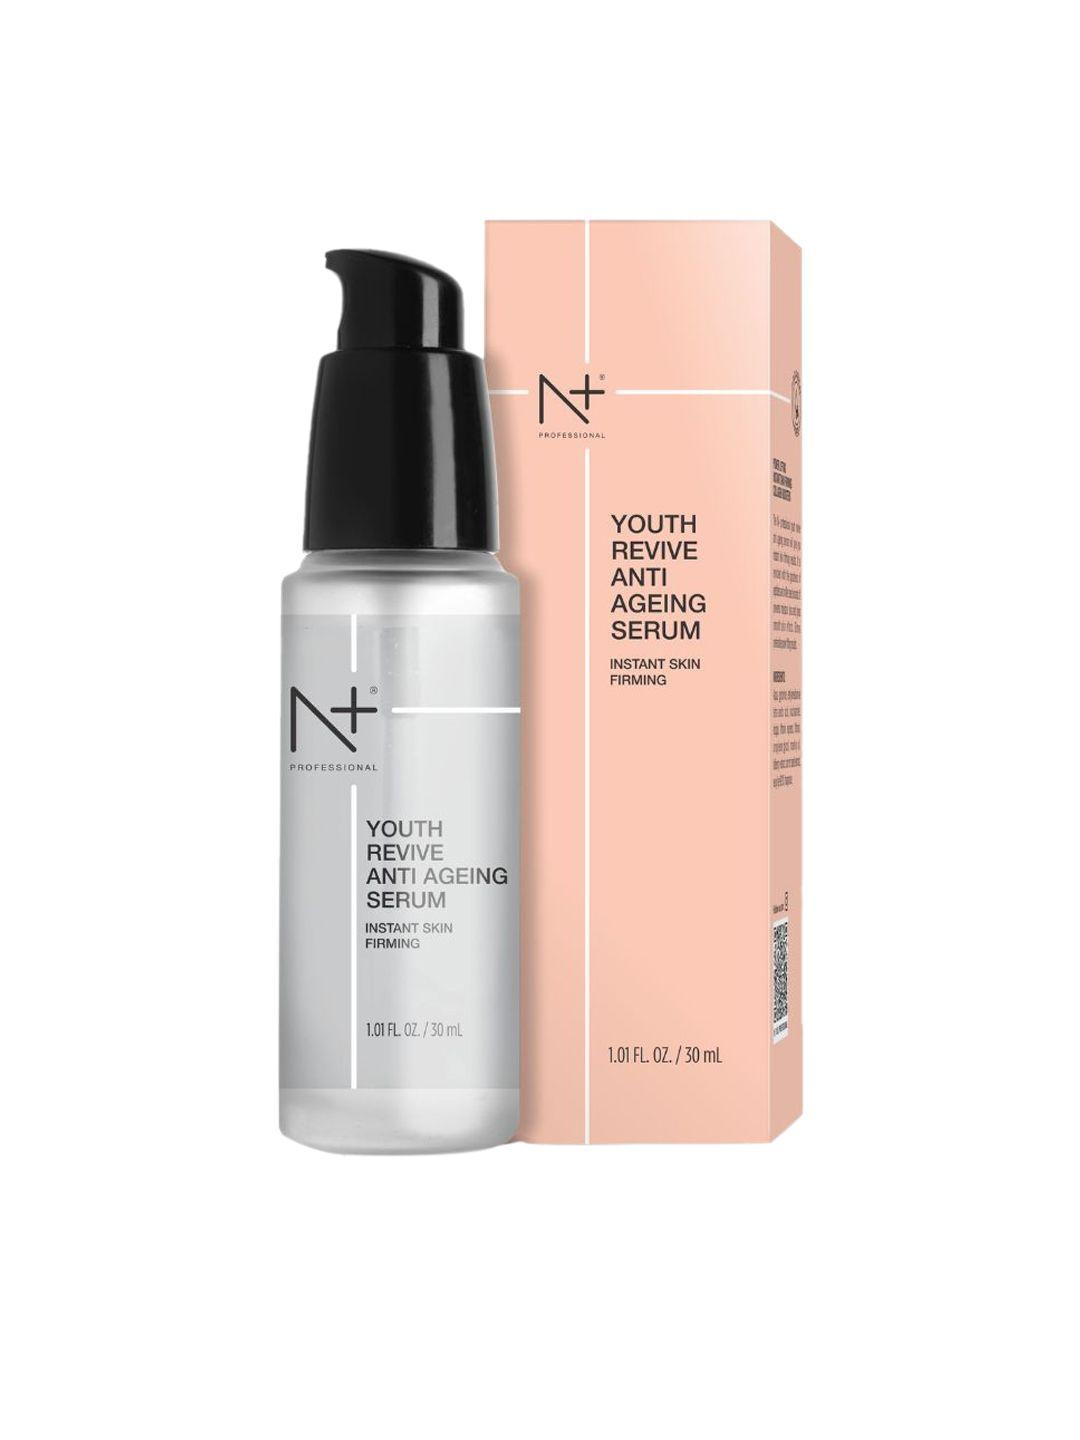 n plus professional instant skin firming youth revive anti ageing face serum - 30ml